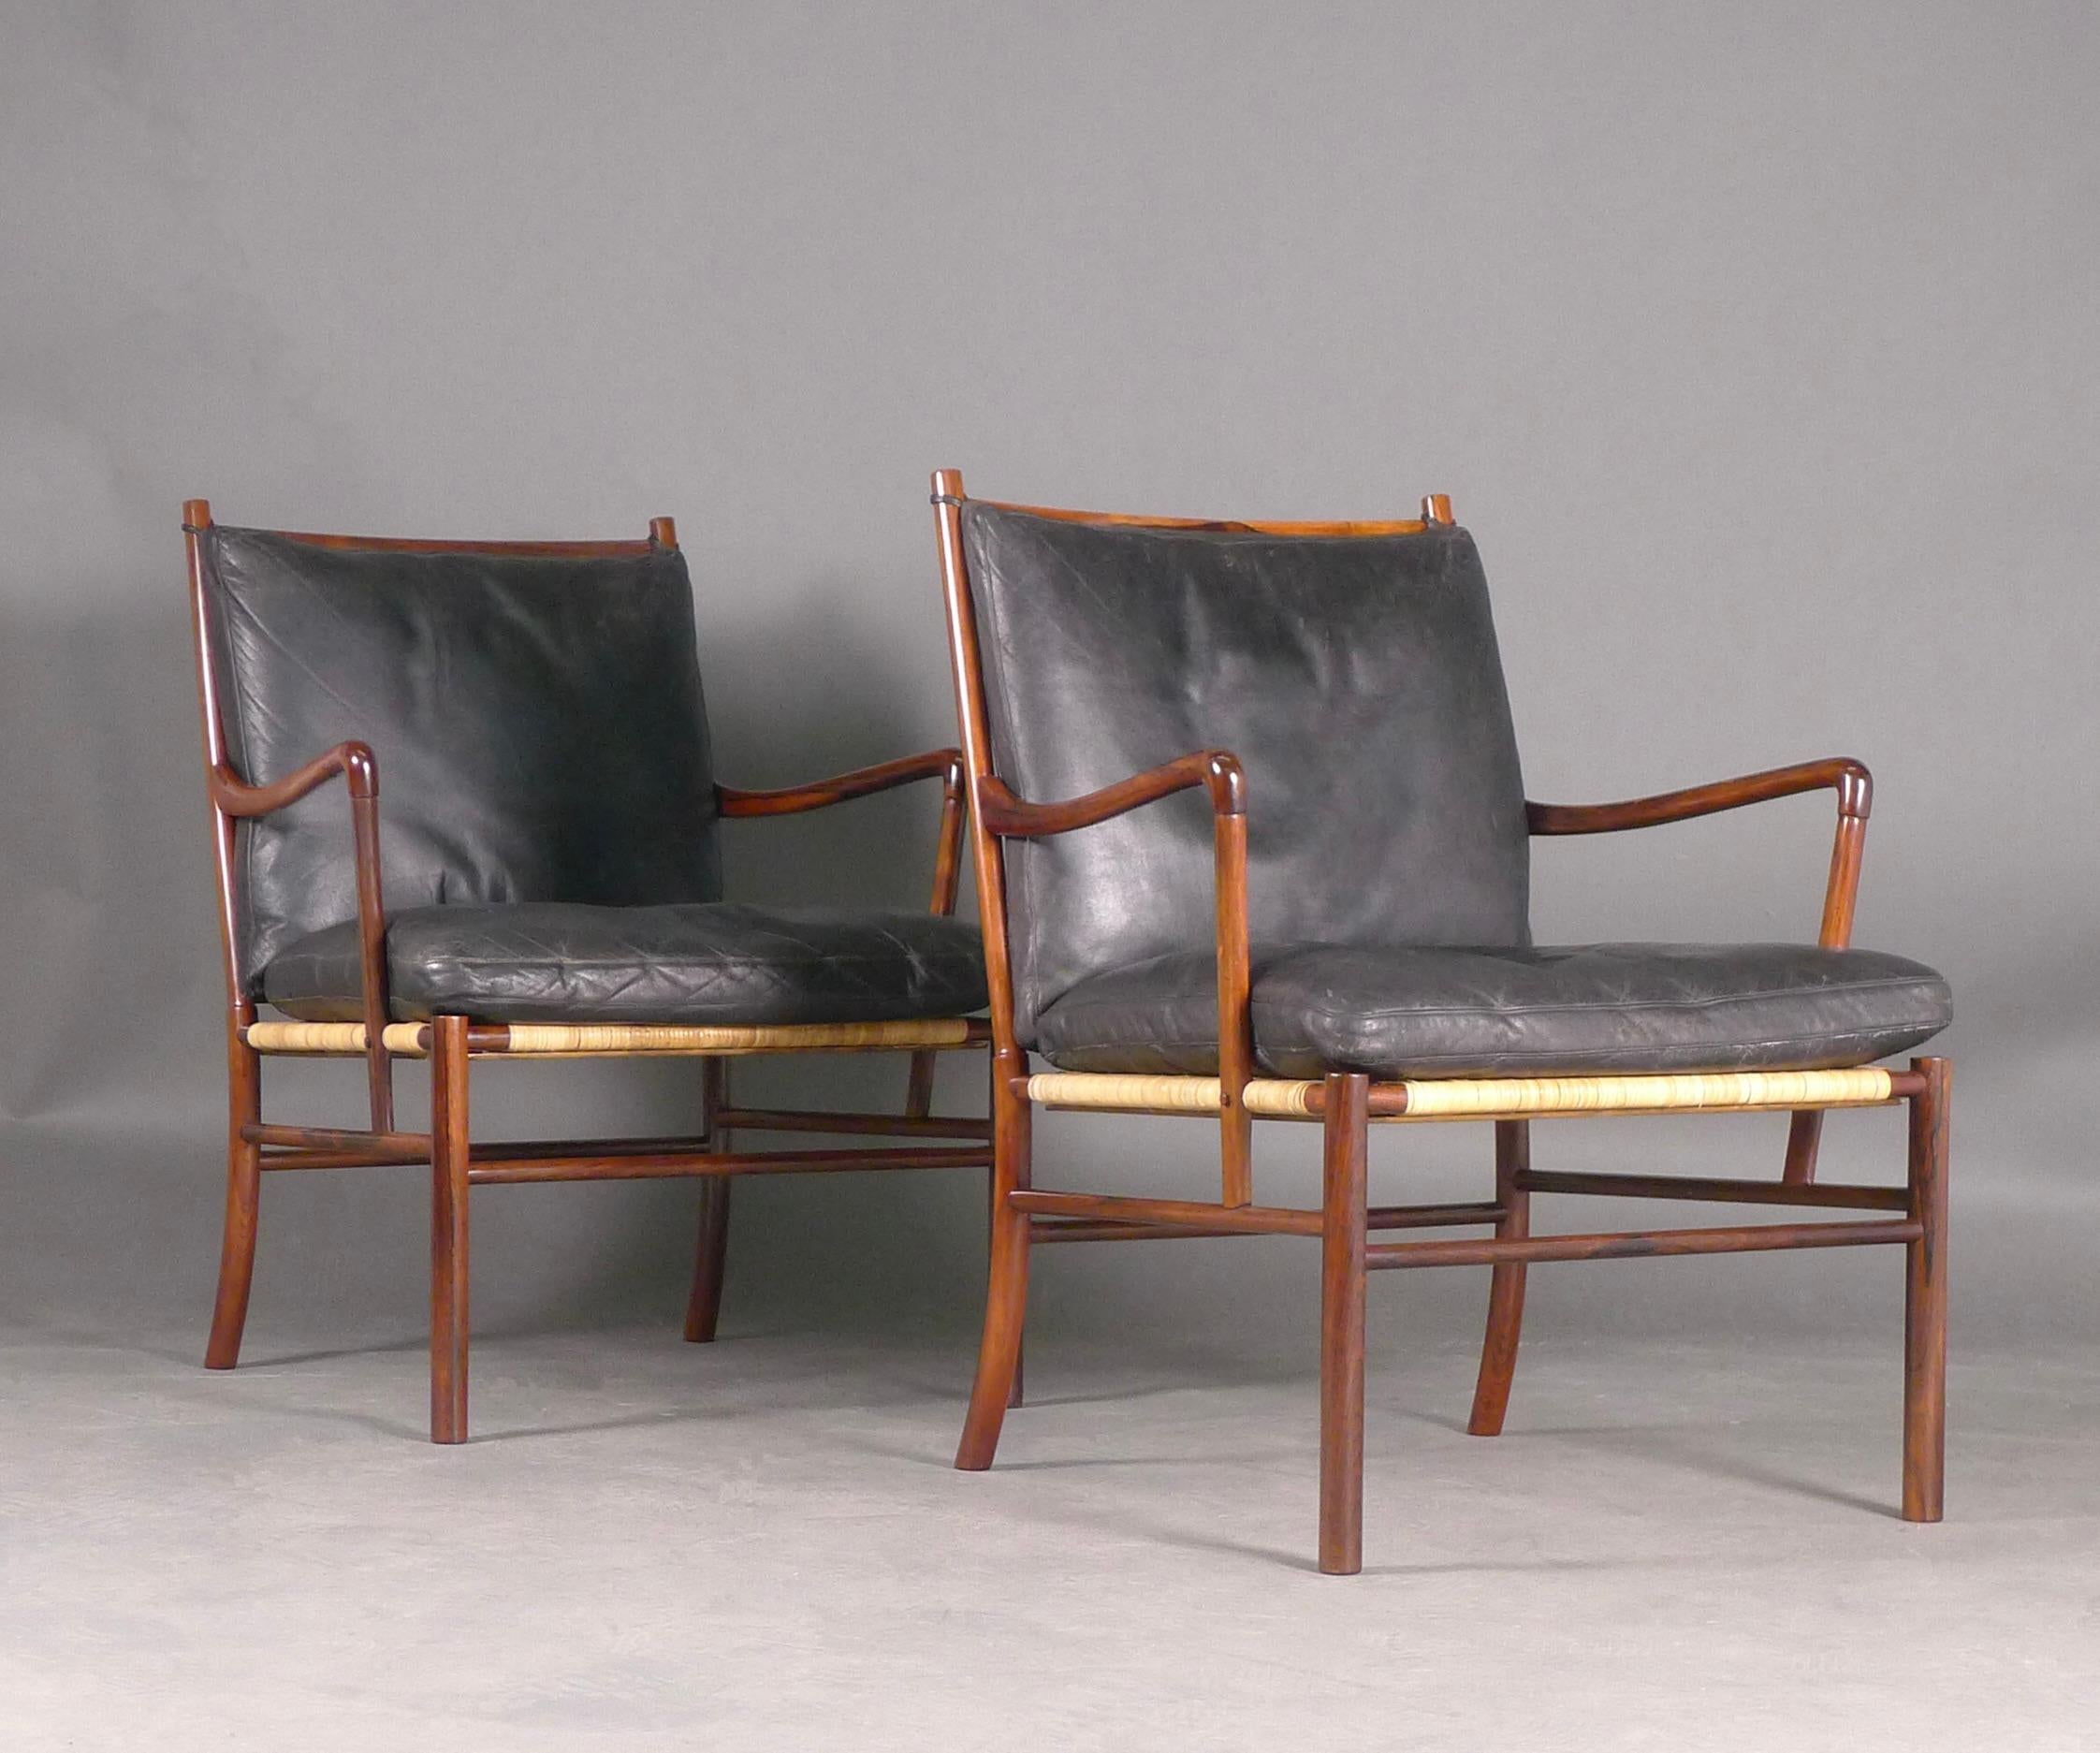 Mid-20th Century Ole Wanscher, Pair of Colonial Chairs, model PJ149, 1st Edition 1949, Rosewood